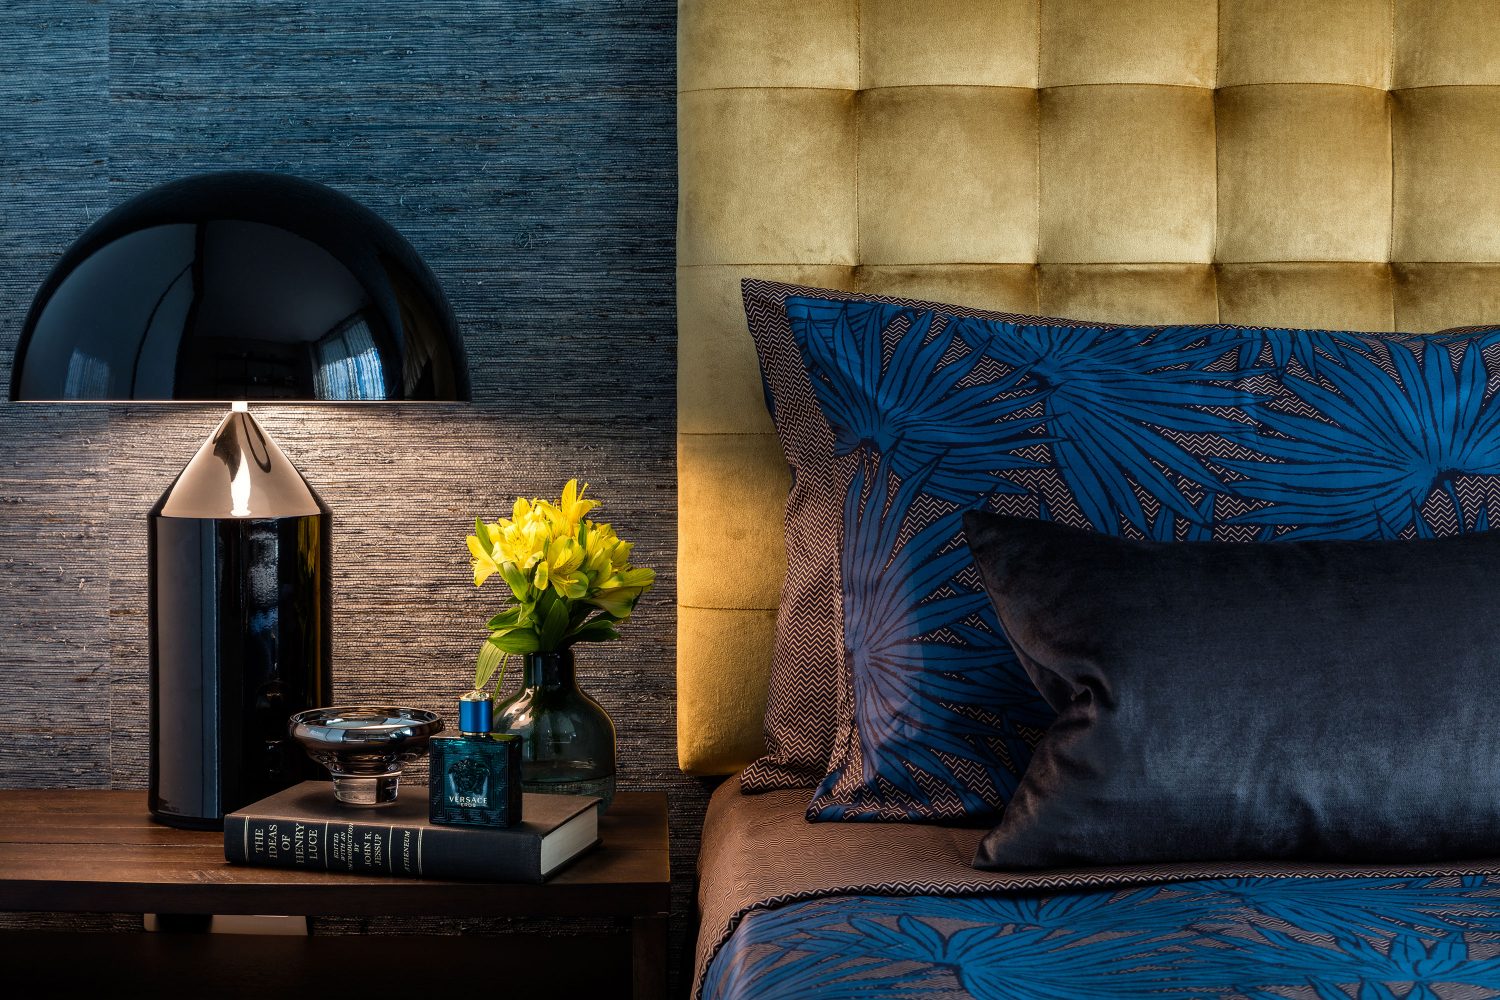 Daniel Hopwood Dollar Bay penthouse design. Blue bedroom with gold accents, close up